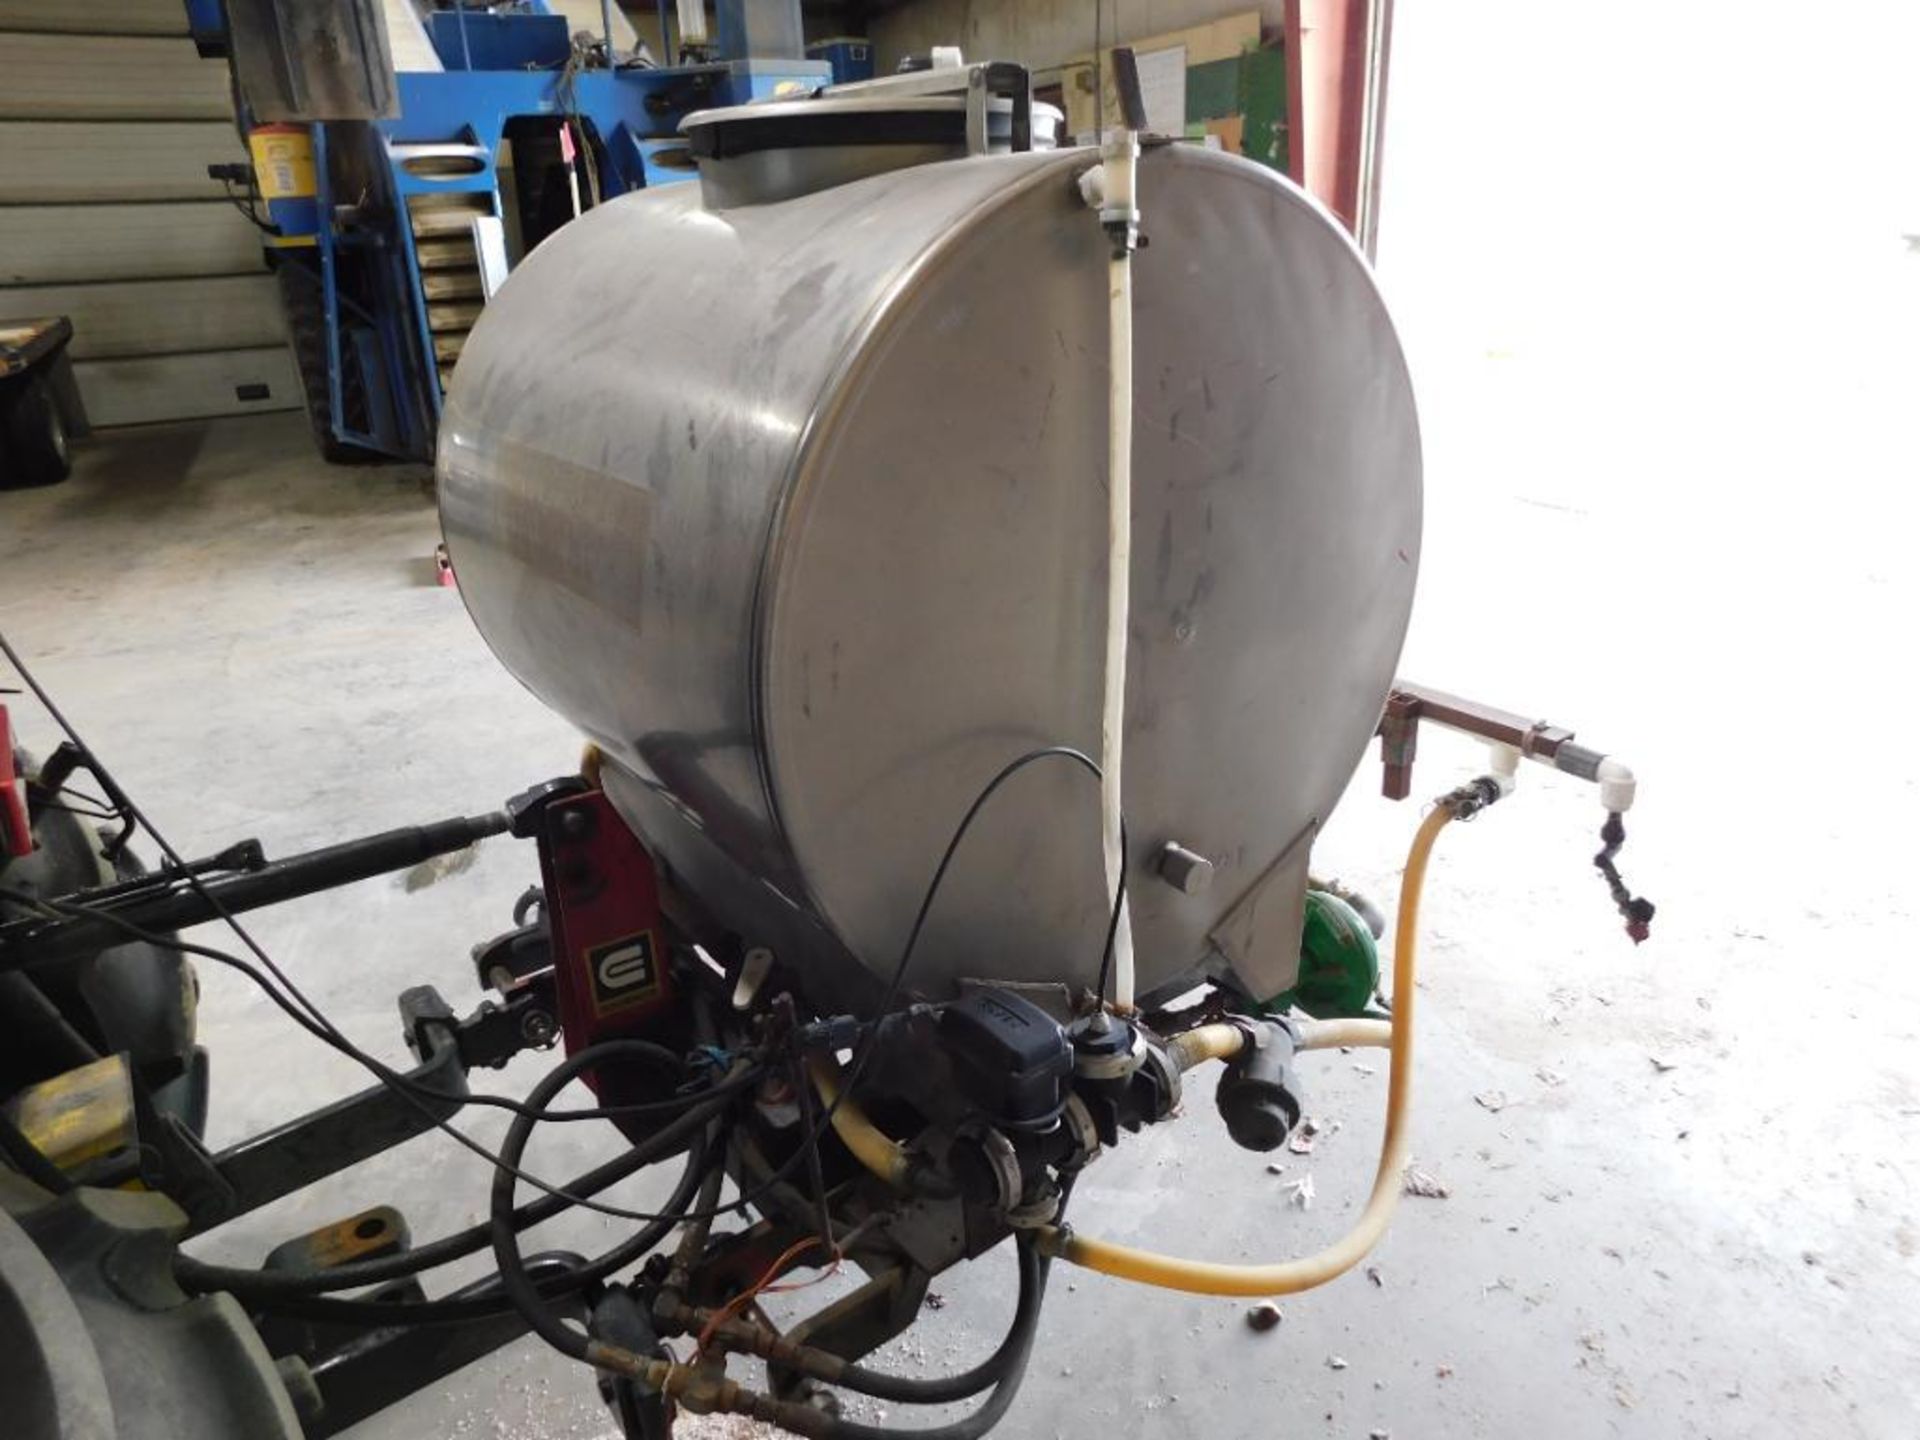 Edwards Rear Mounted 3 Pt. Hitch Sprayer w/Spokane Stainless Steel Tank (LOCATED IN MAINTENANCE AREA - Image 2 of 4